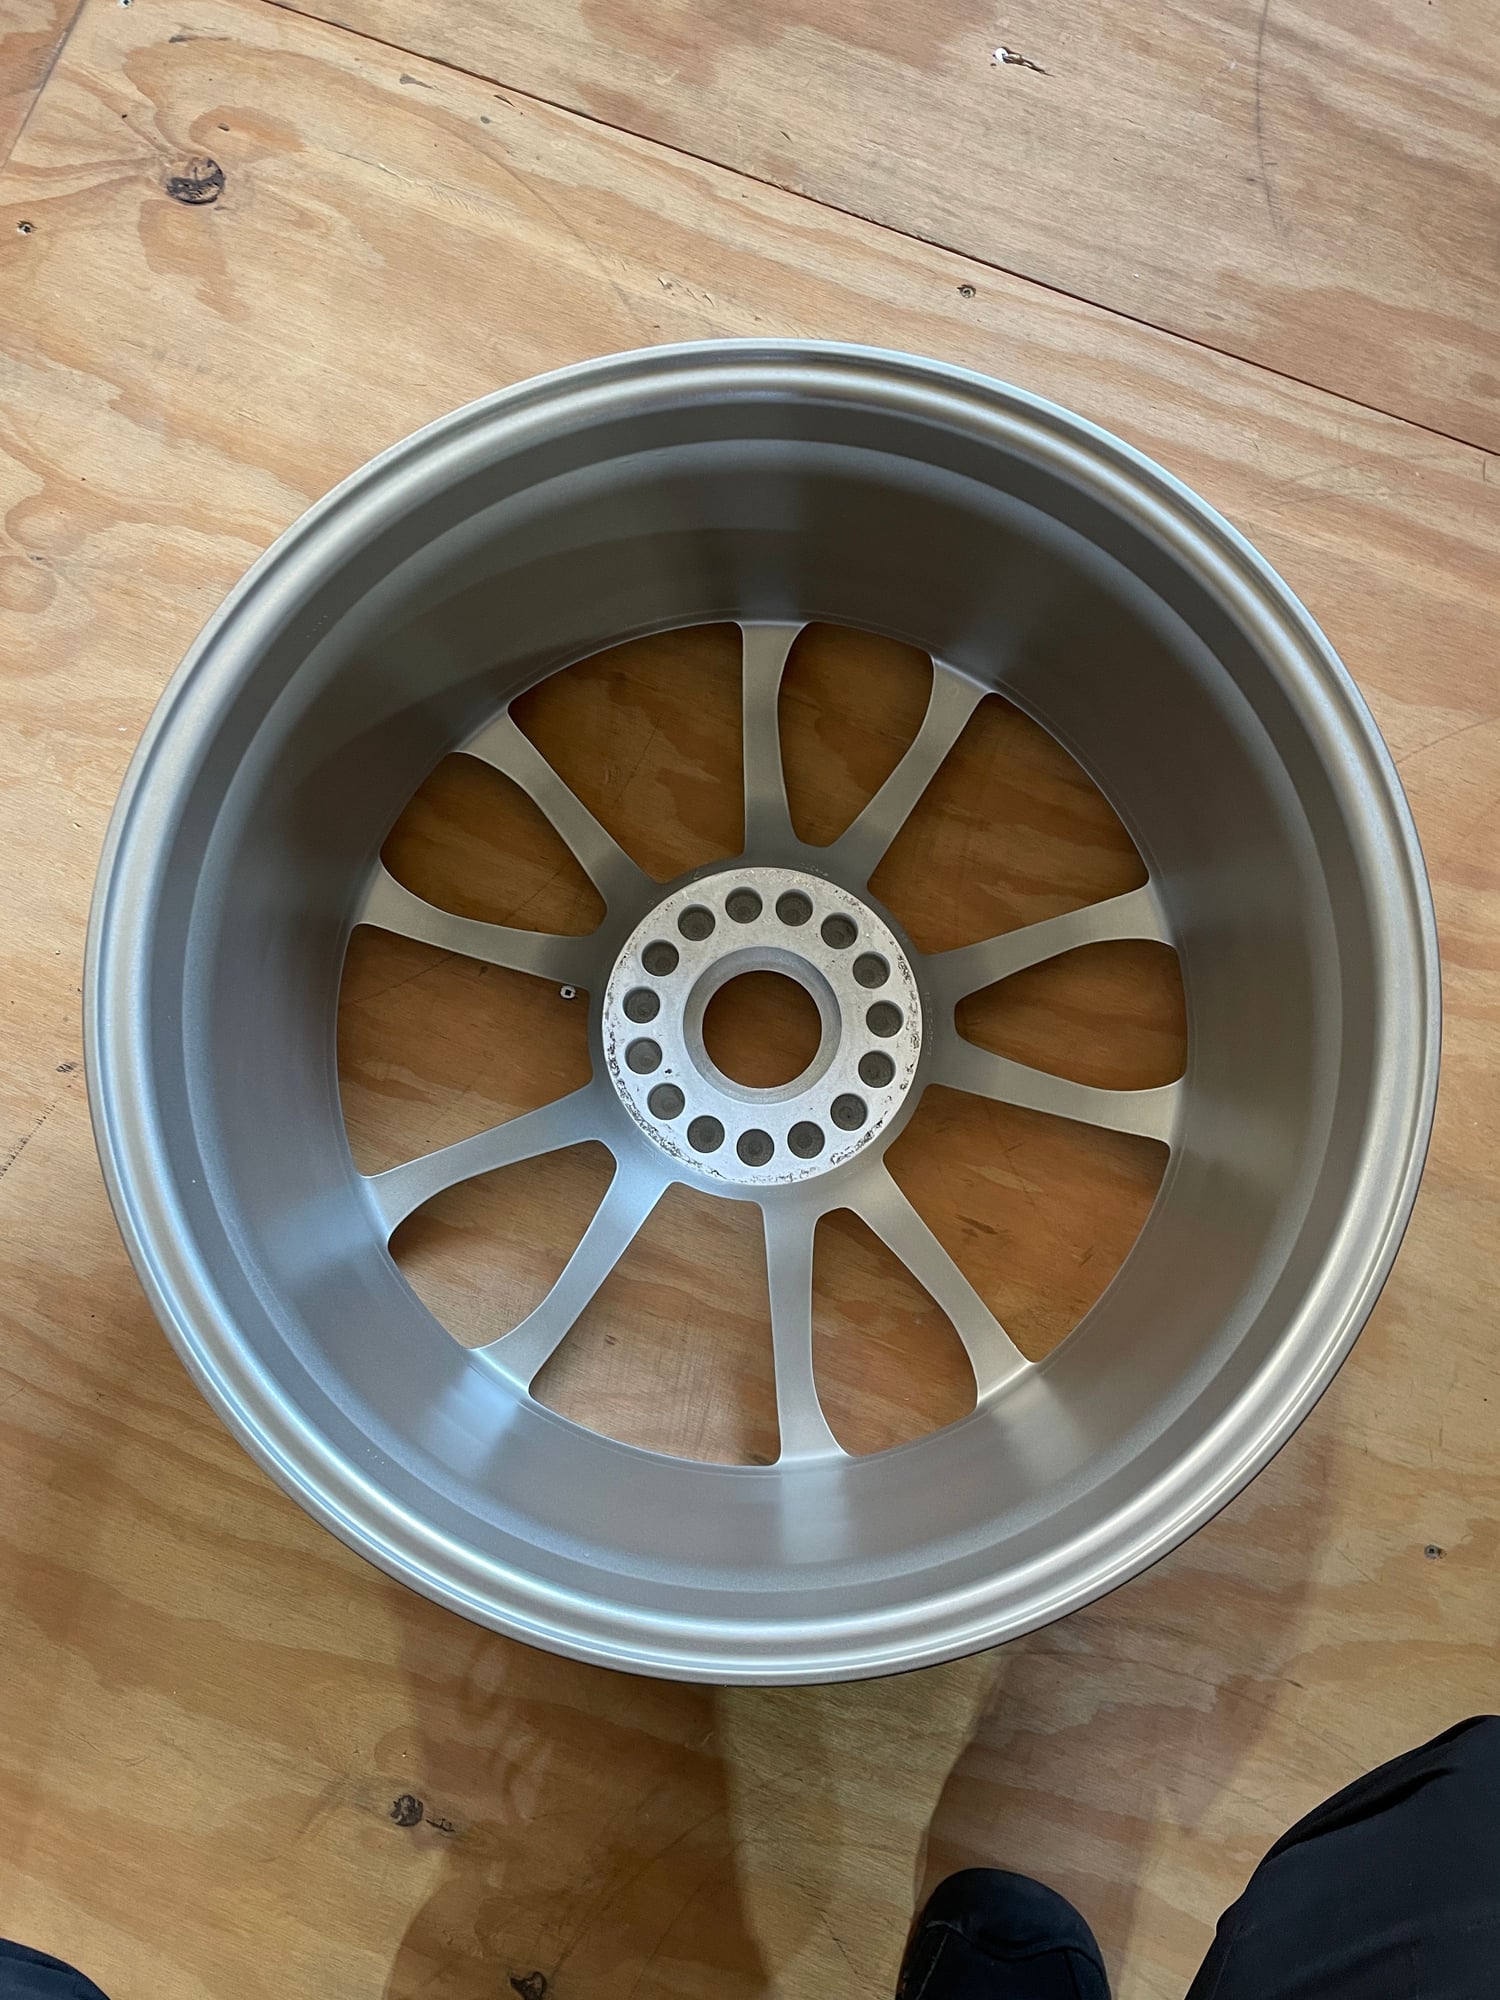 Wheels and Tires/Axles - 991 GT3 Centerlock Wheels - 9.5/10 Condition - Used - 2014 to 2019 Porsche 911 - Overland Park, KS 66221, United States